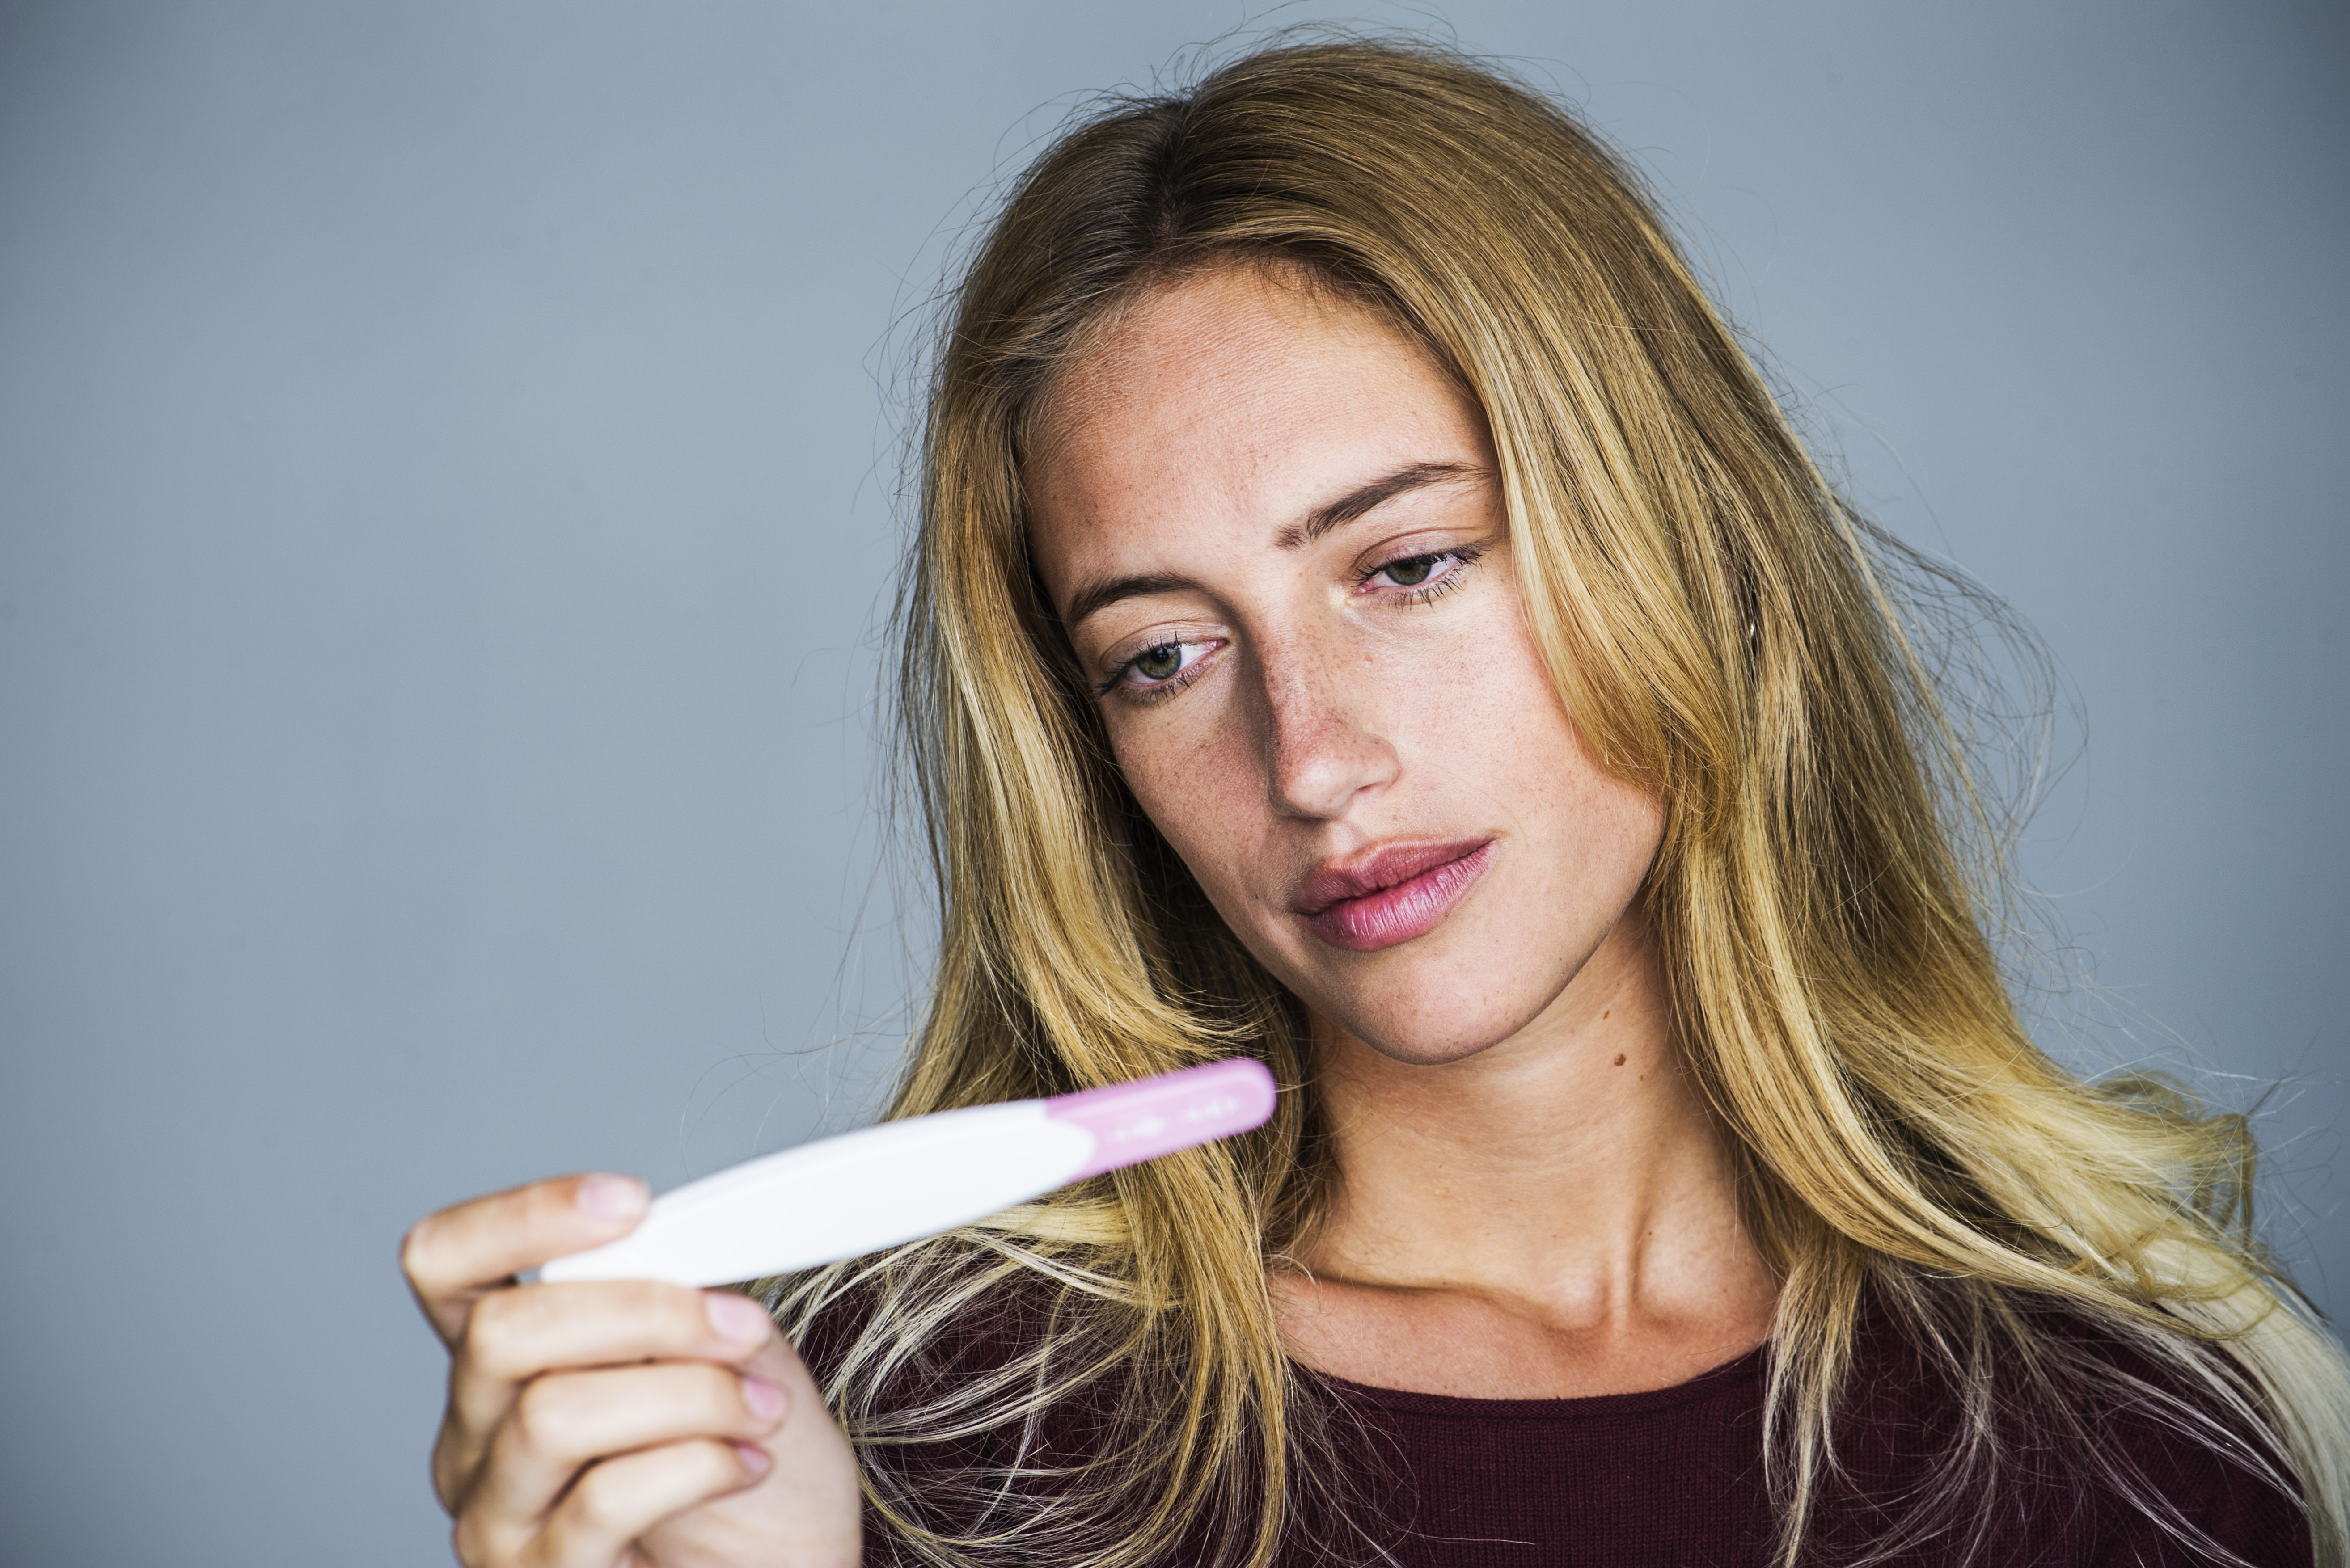 Young woman looking at pregnancy test with disappointed expression | Source: Getty Images